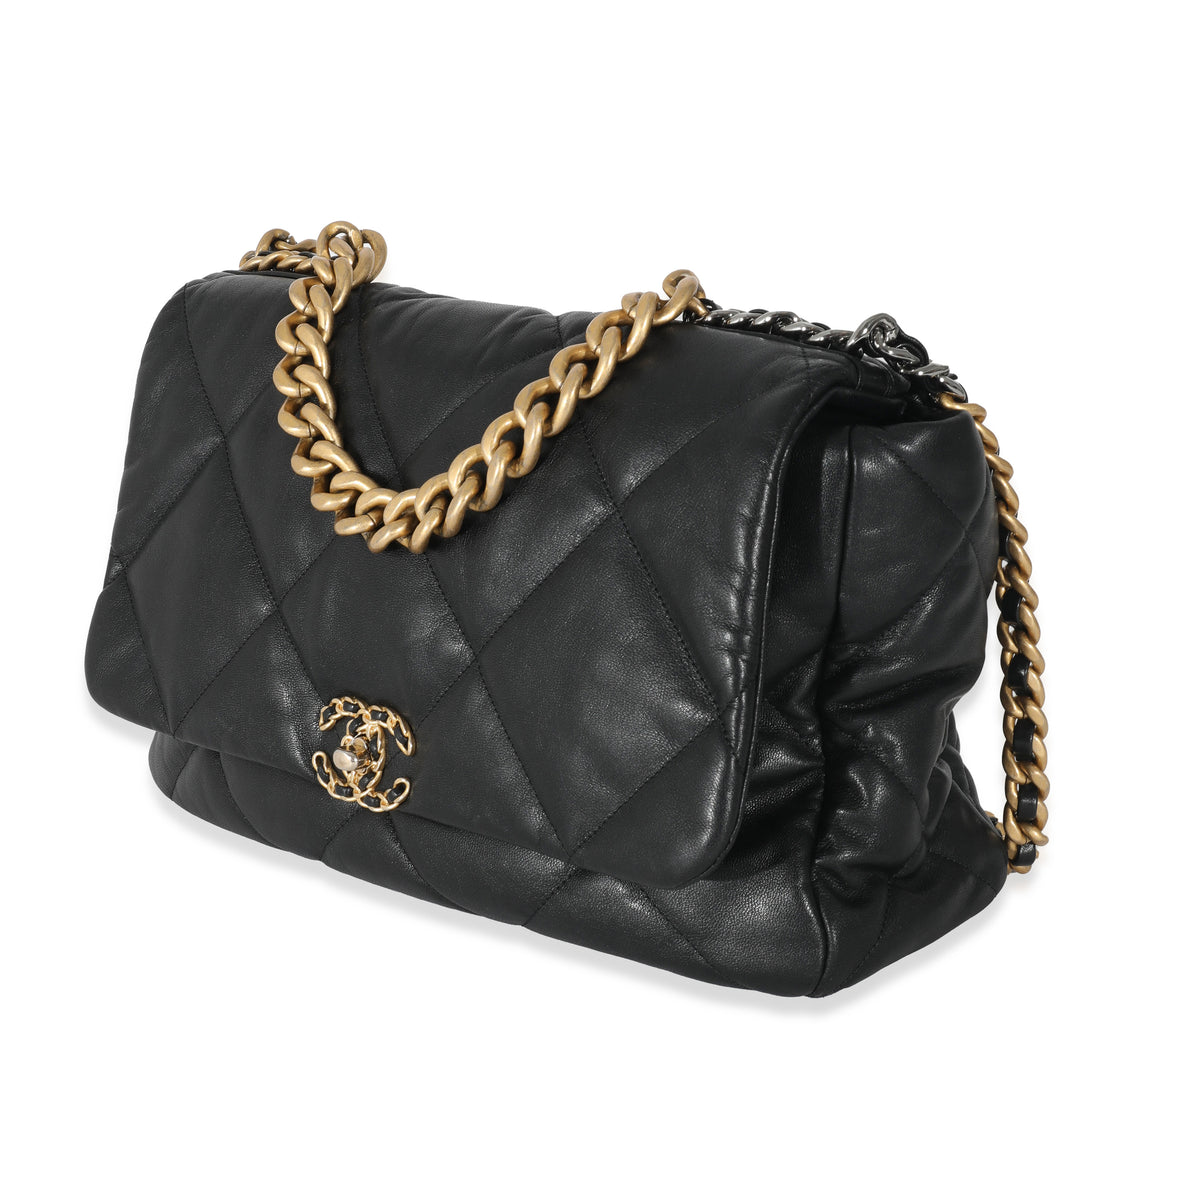 CHANEL 19 - CC Chain Maxi Black / Multi Metal Quilted Lambskin